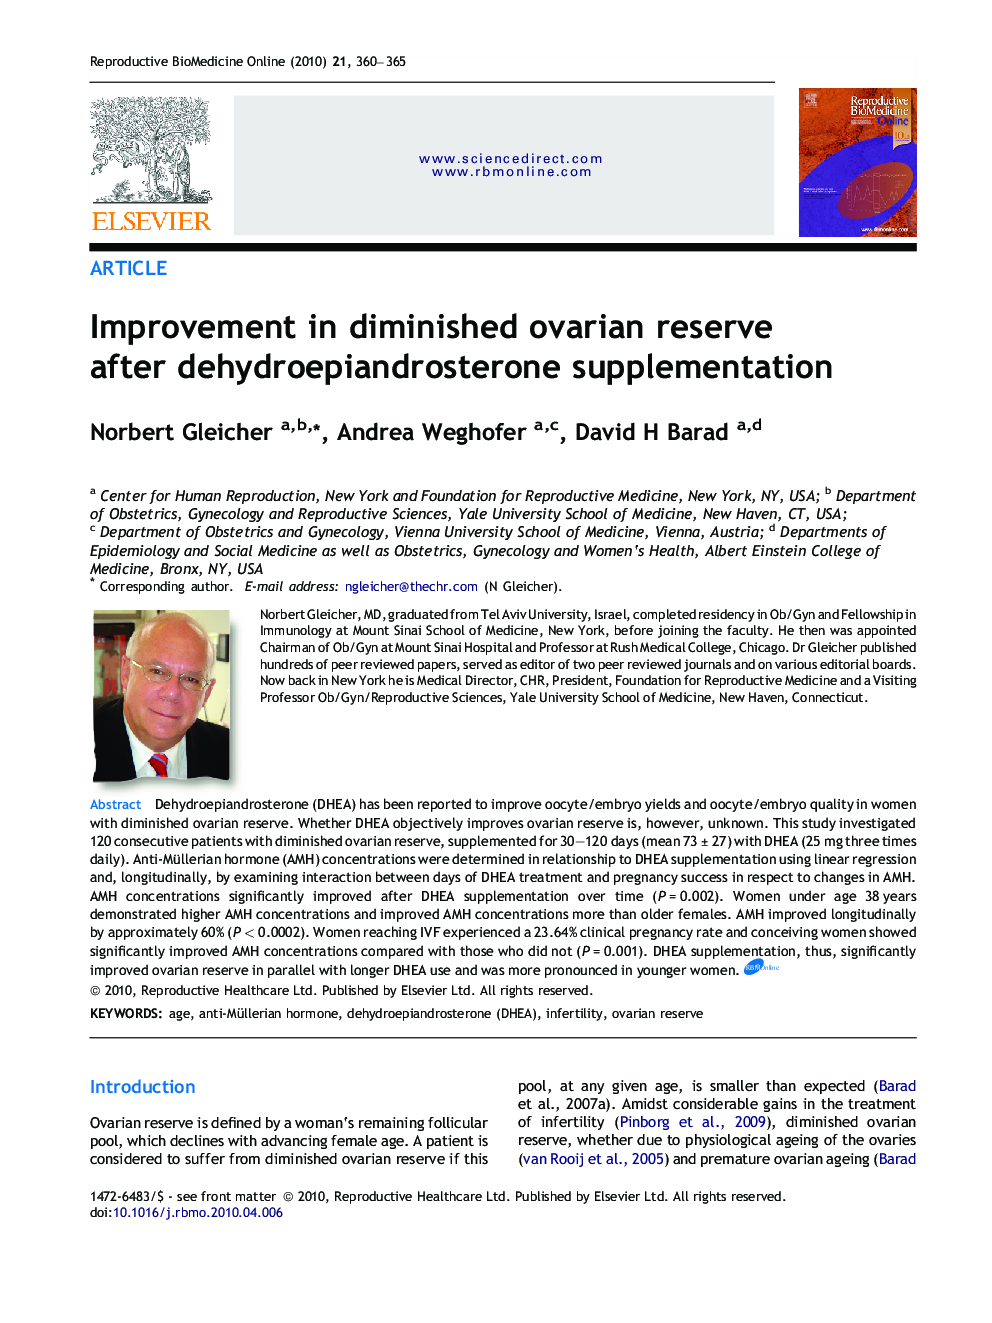 Improvement in diminished ovarian reserve after dehydroepiandrosterone supplementation 